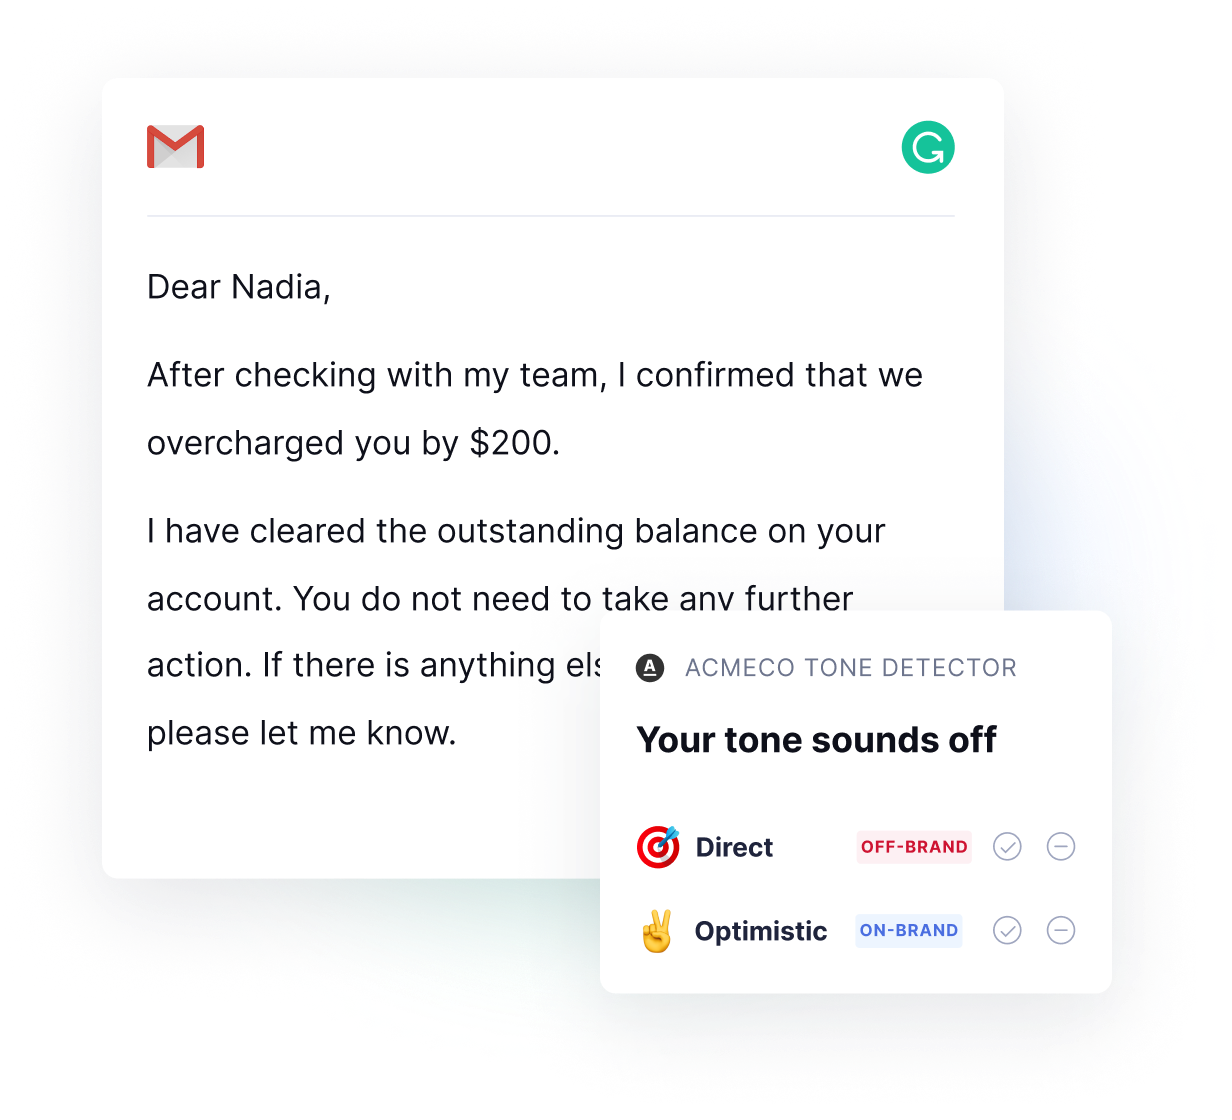 Grammarly detects your tone in emails